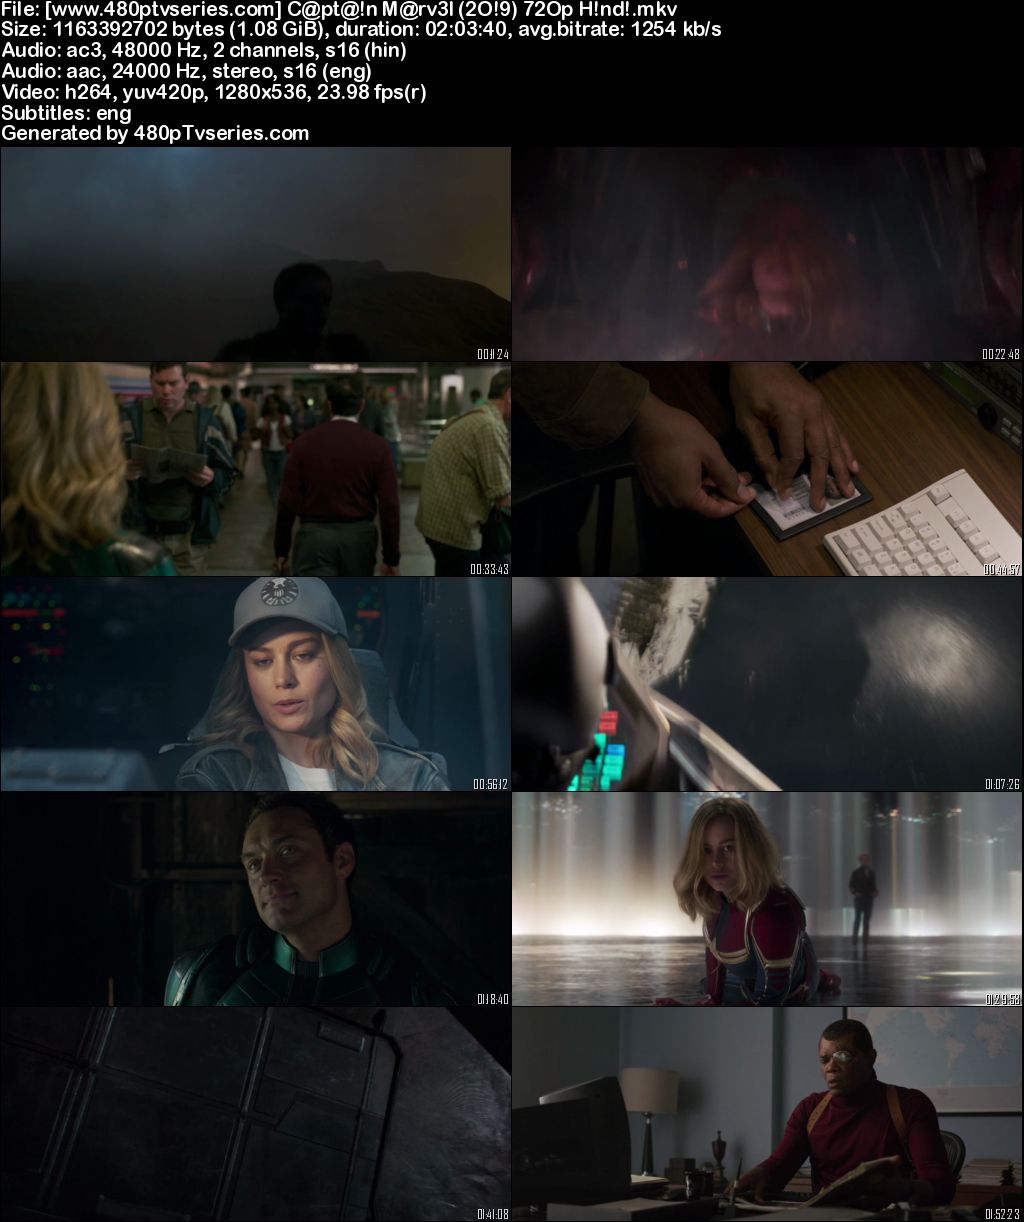 Watch Online Free Captain Marvel (2019) Full Hindi Dual Audio Movie Download 480p 720p Web-DL